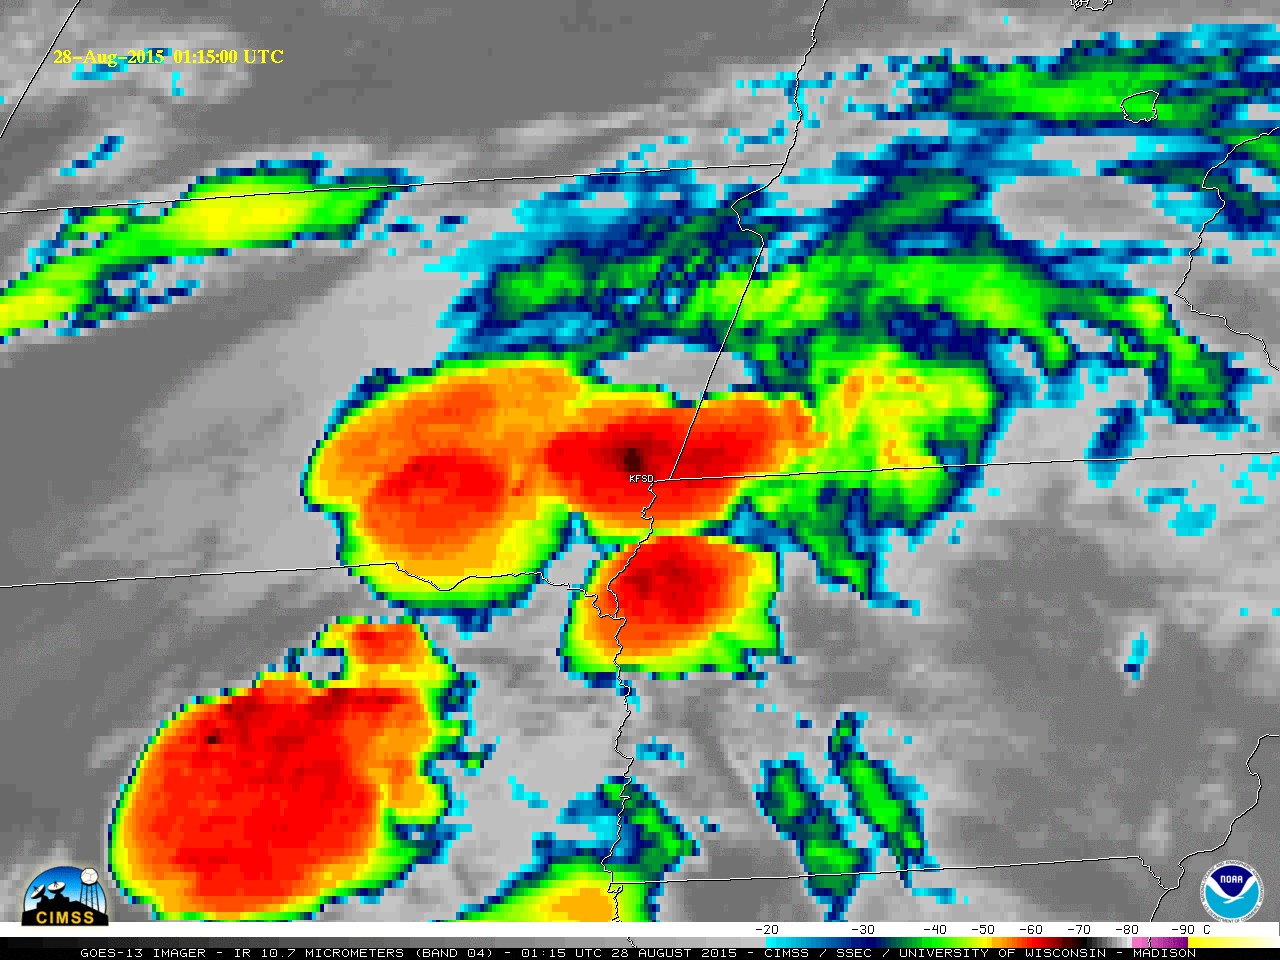 GOES-13 Infrared (10.7 um) images [click to play animation]